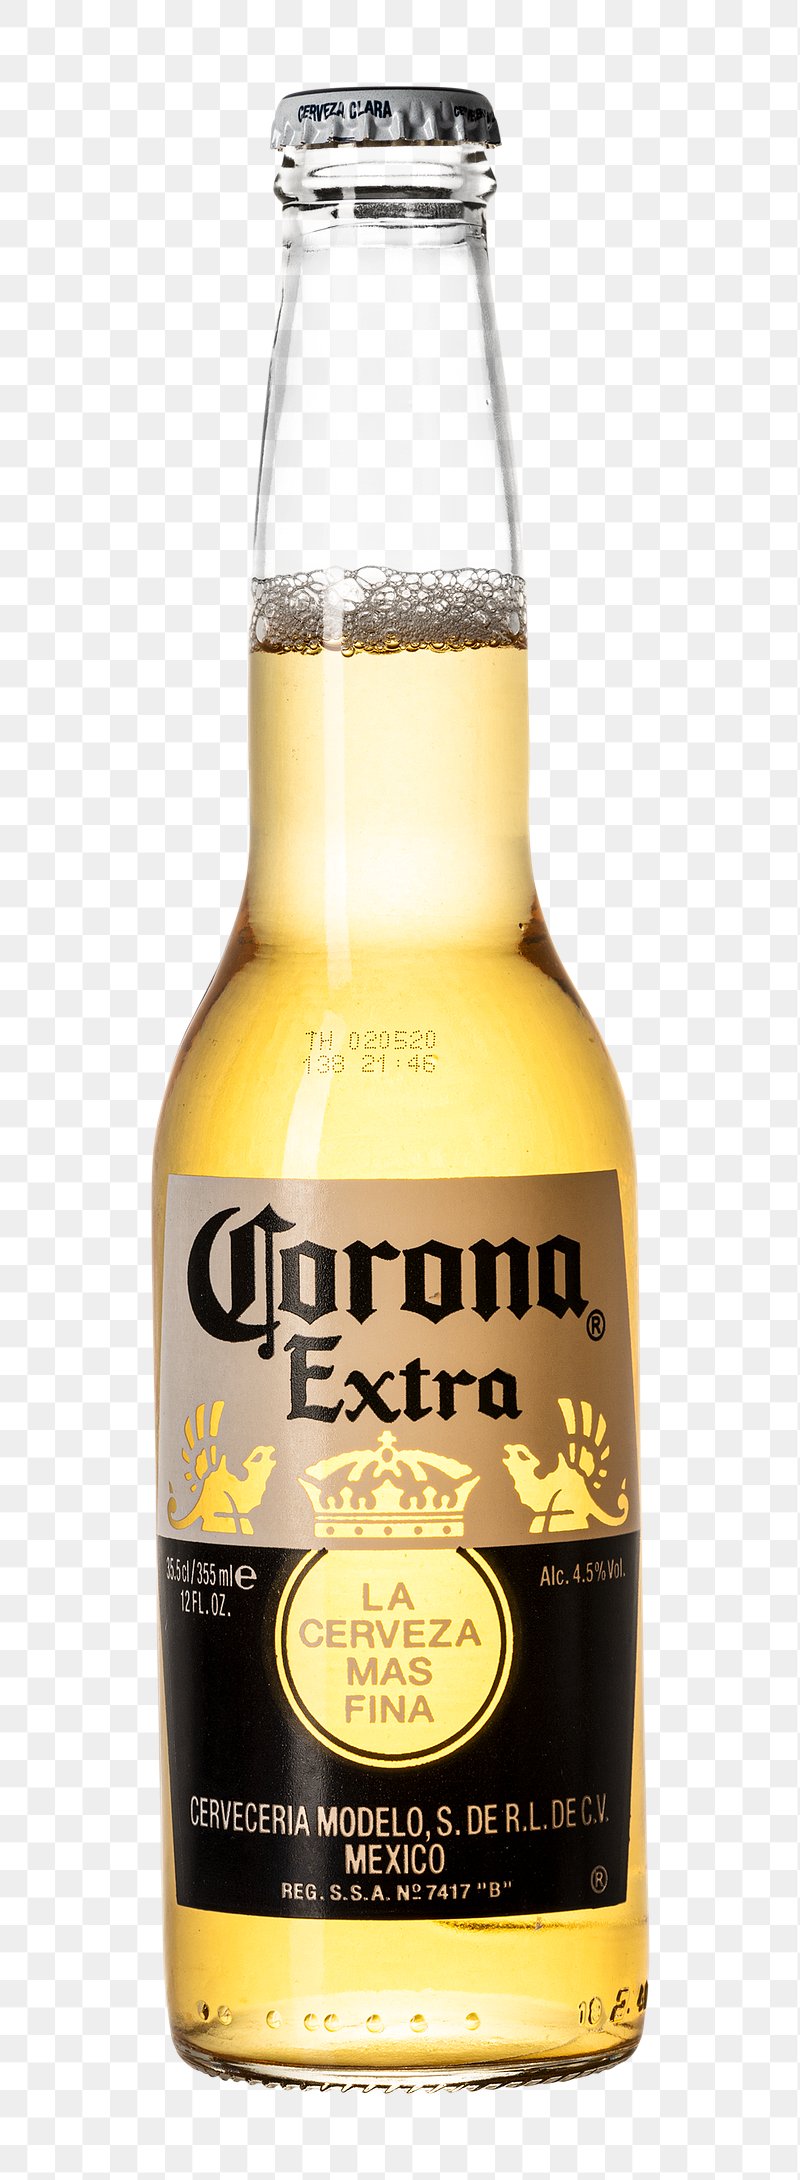 Corona Beer Images | Free Photos, PNG Stickers, Wallpapers & Backgrounds -  rawpixel